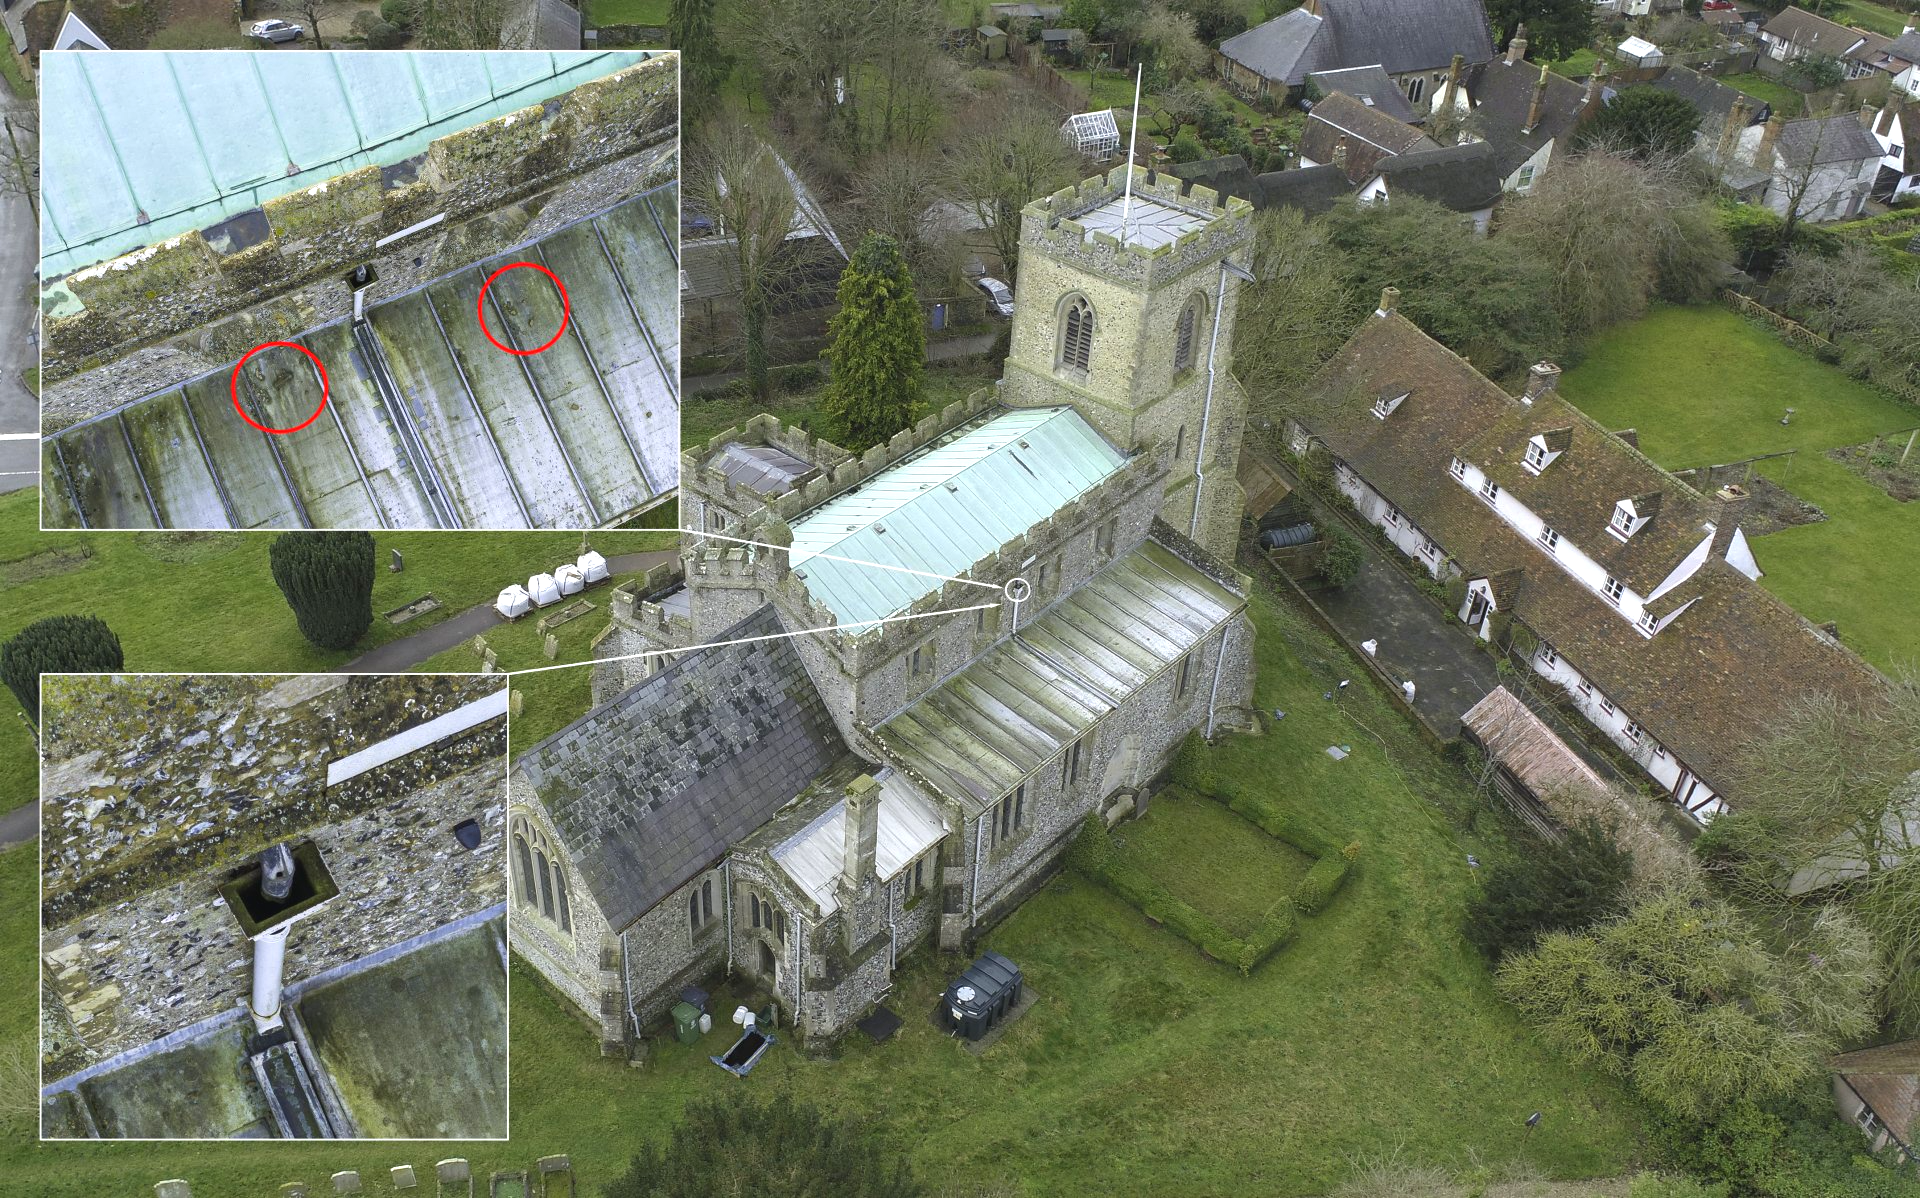 St swithin's church in great chishill aerial survey and inspection